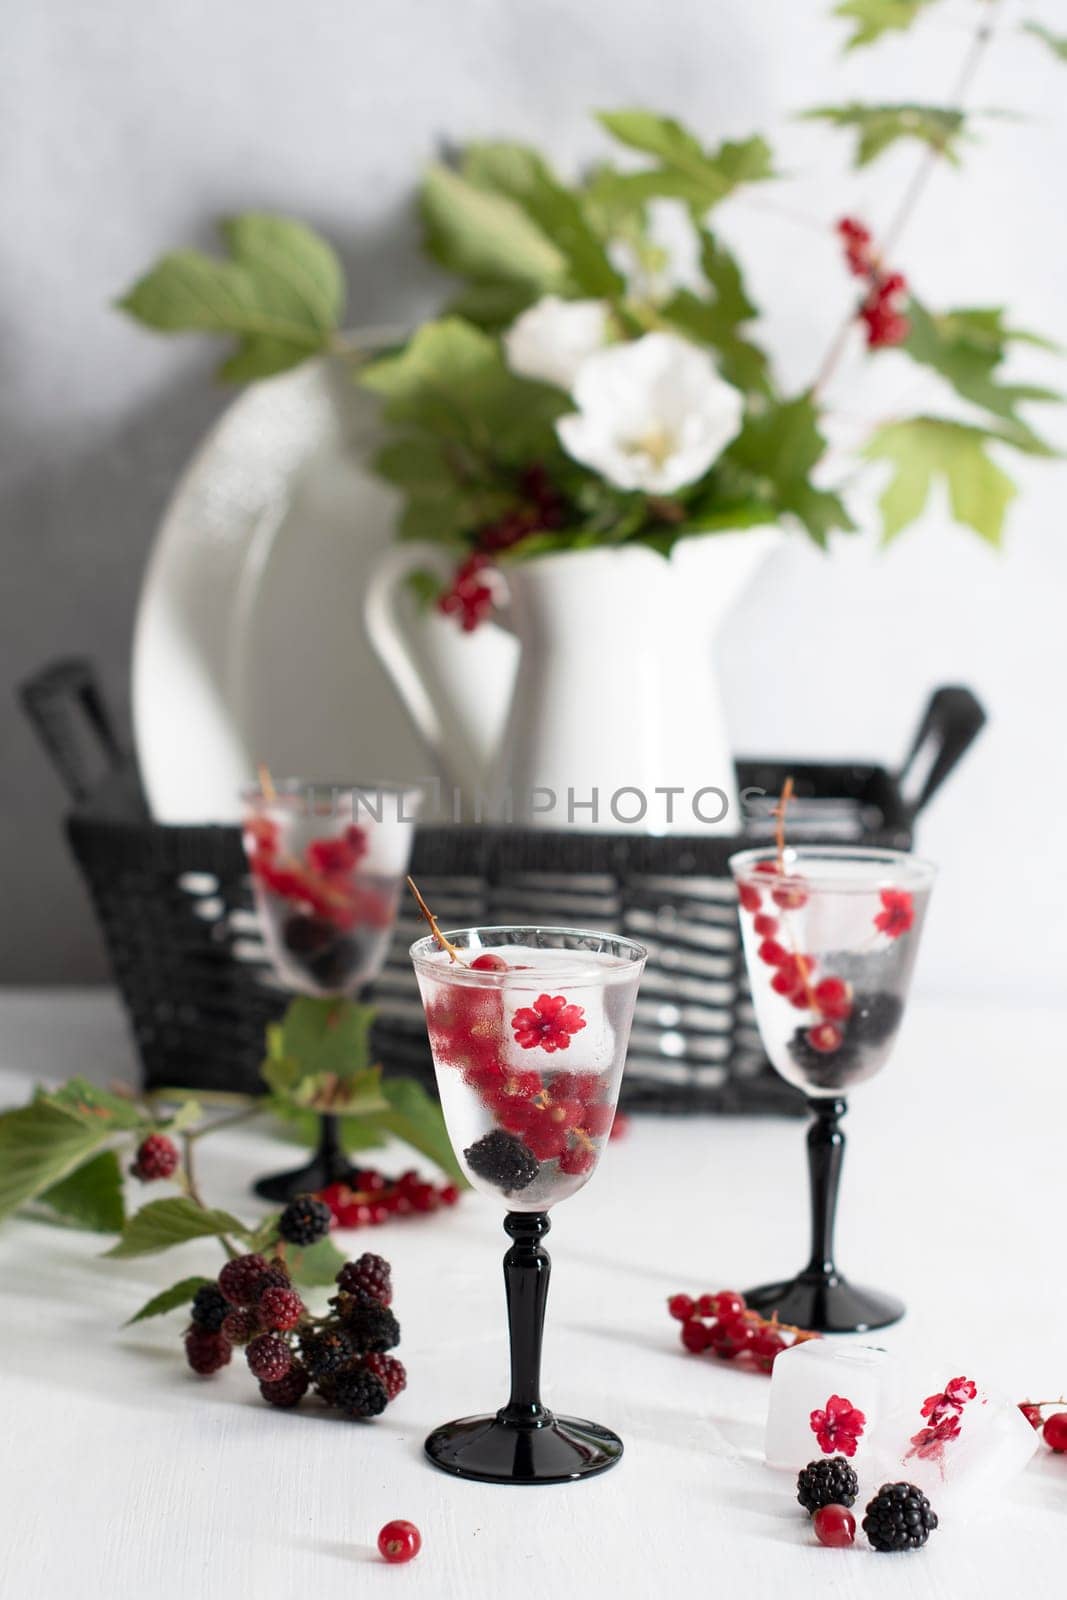 transparent gin and tonic with ice and fresh red currants and blackberries by KaterinaDalemans